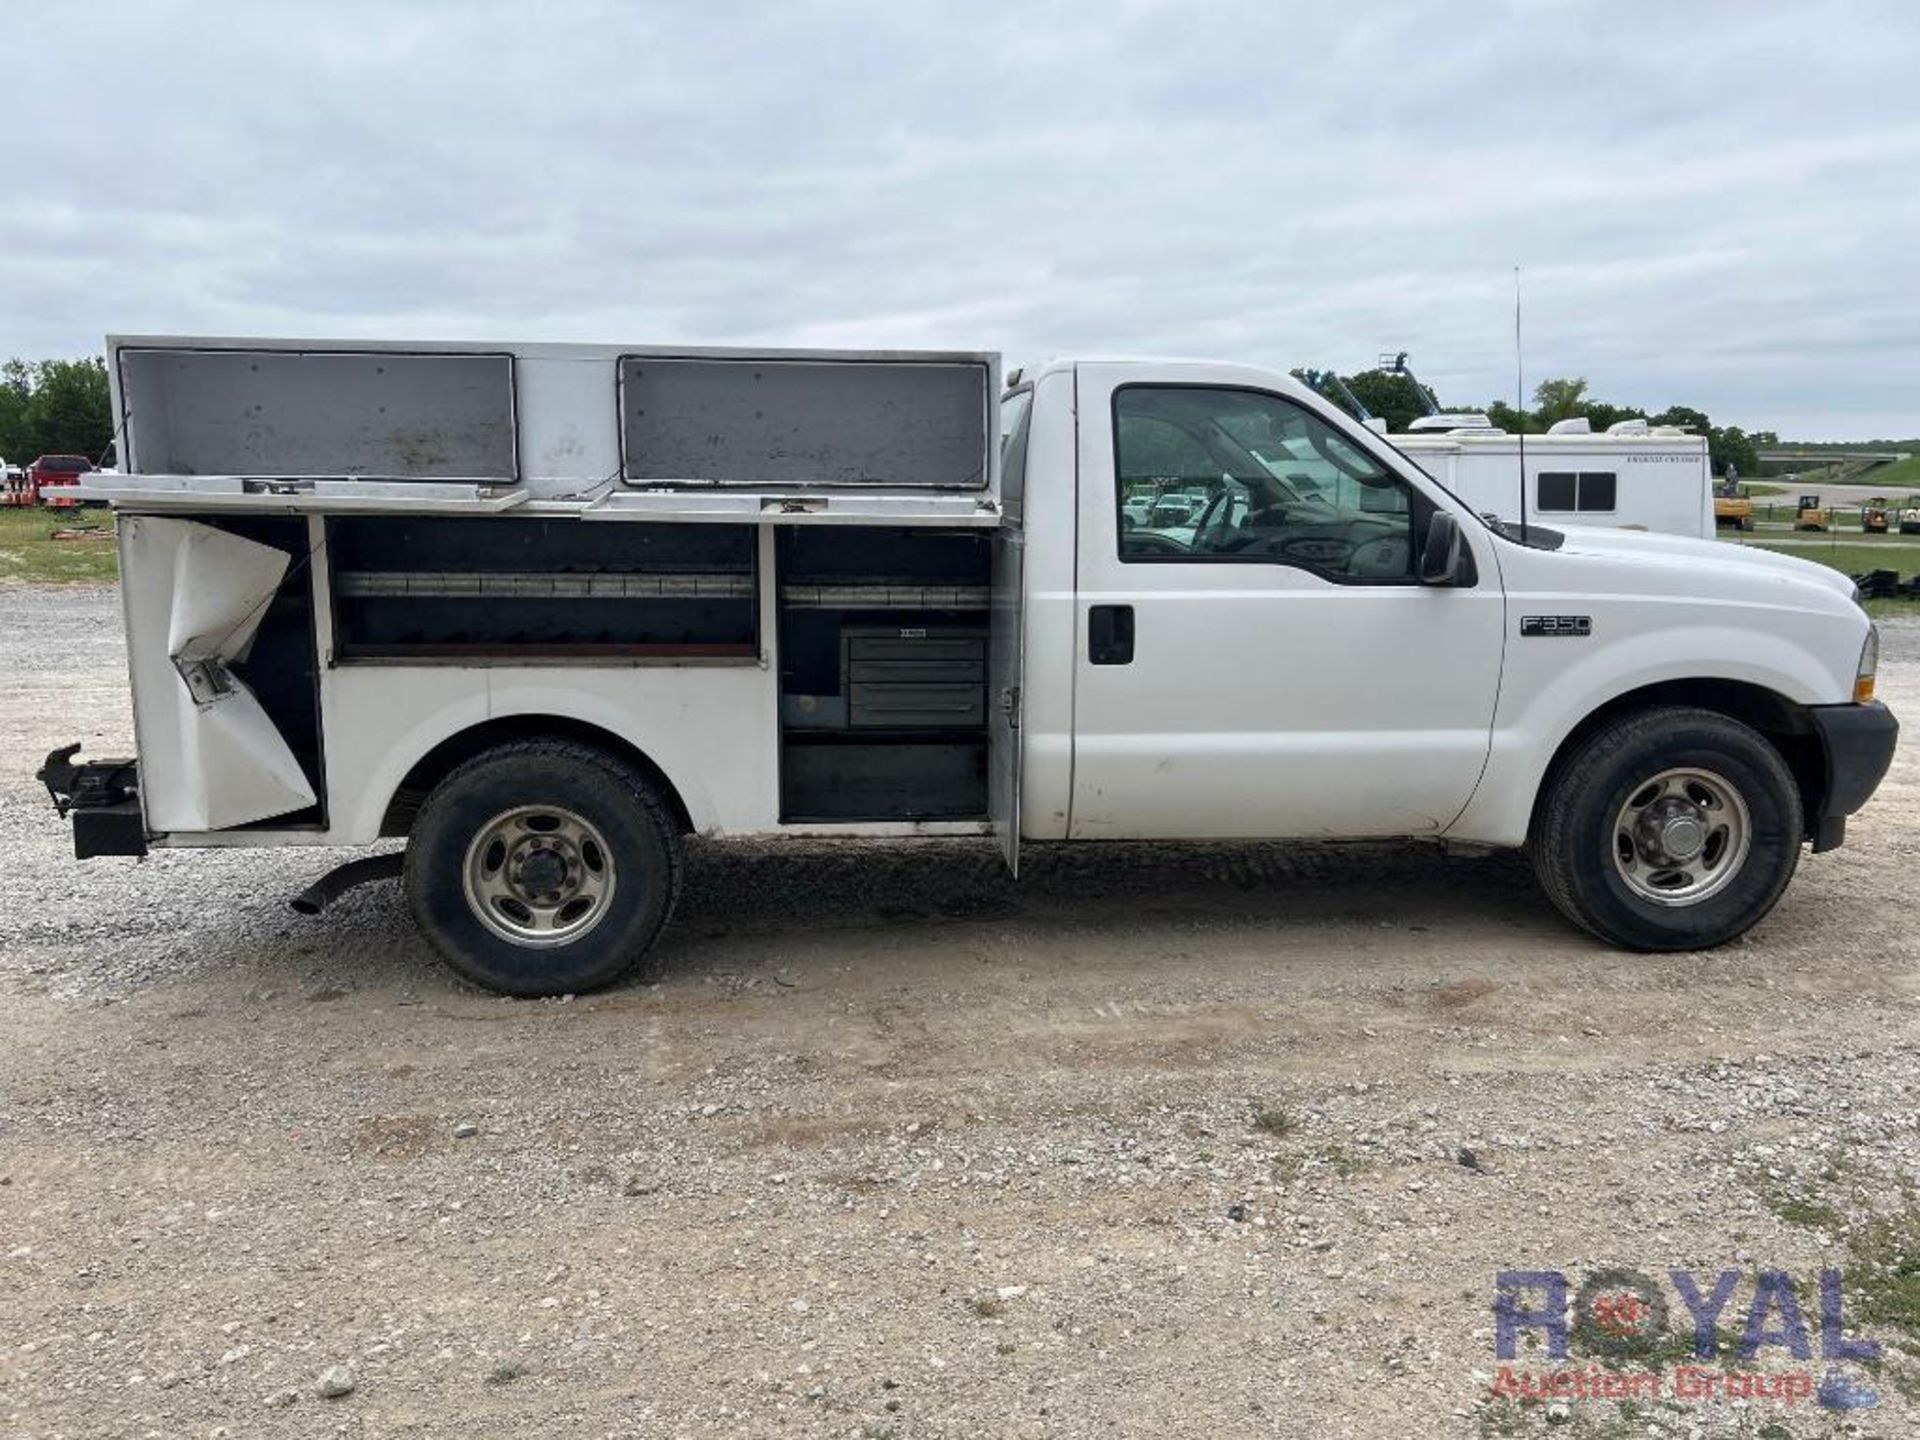 2003 Ford F350 Super Duty Service Truck - Image 22 of 29